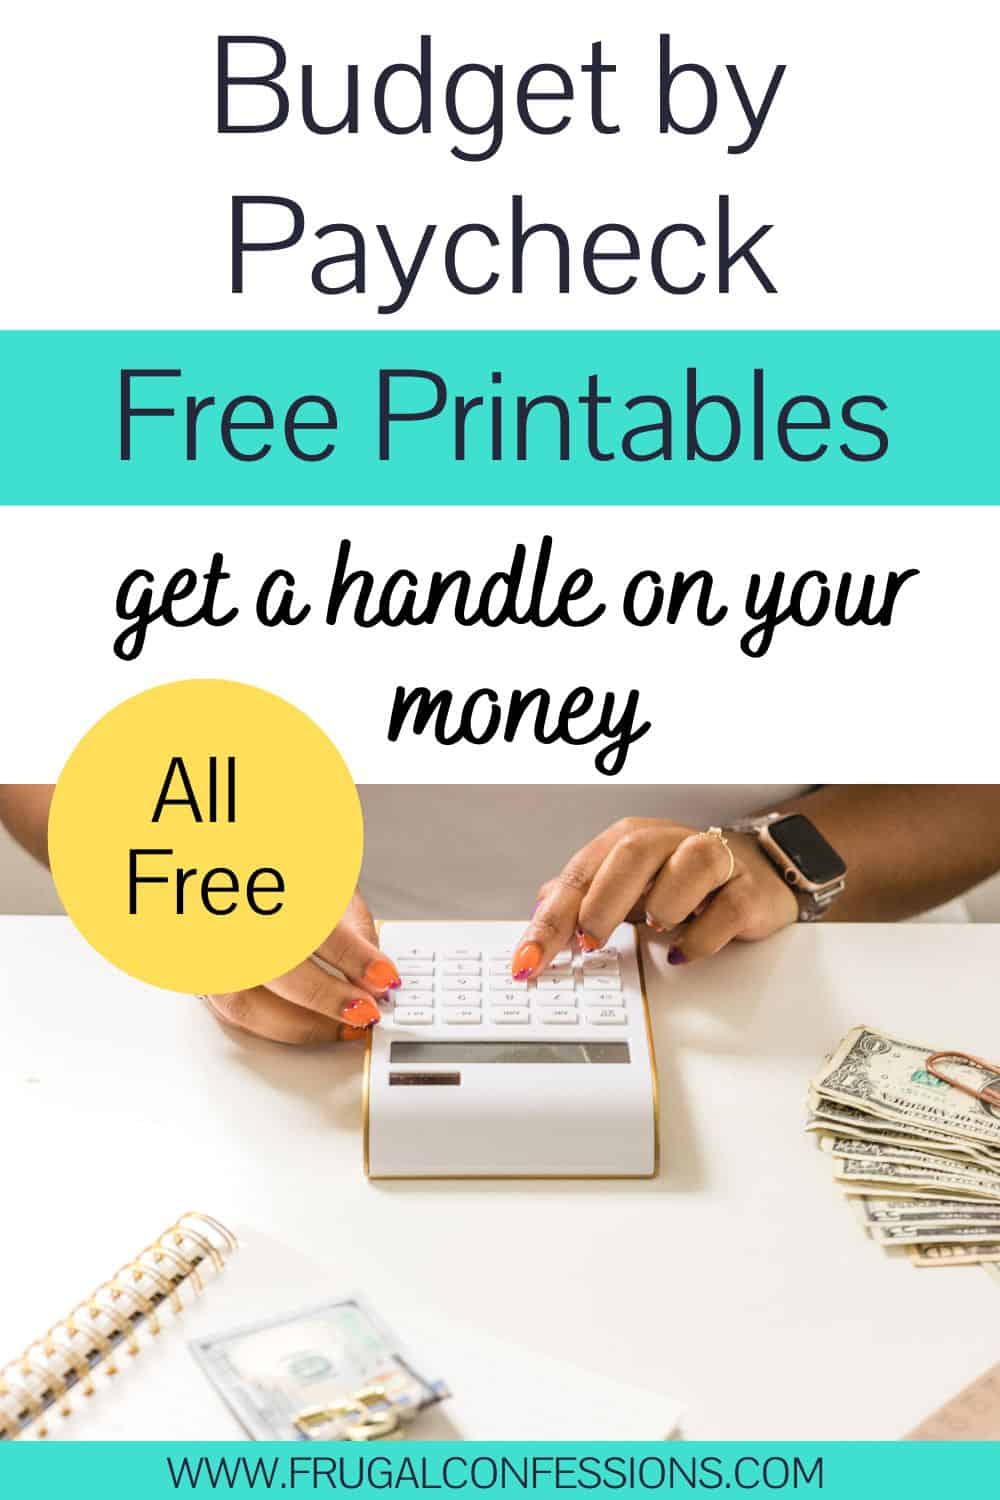 woman with orange colored nails with calculator and cash, text overlay "budget by paycheck free printables"